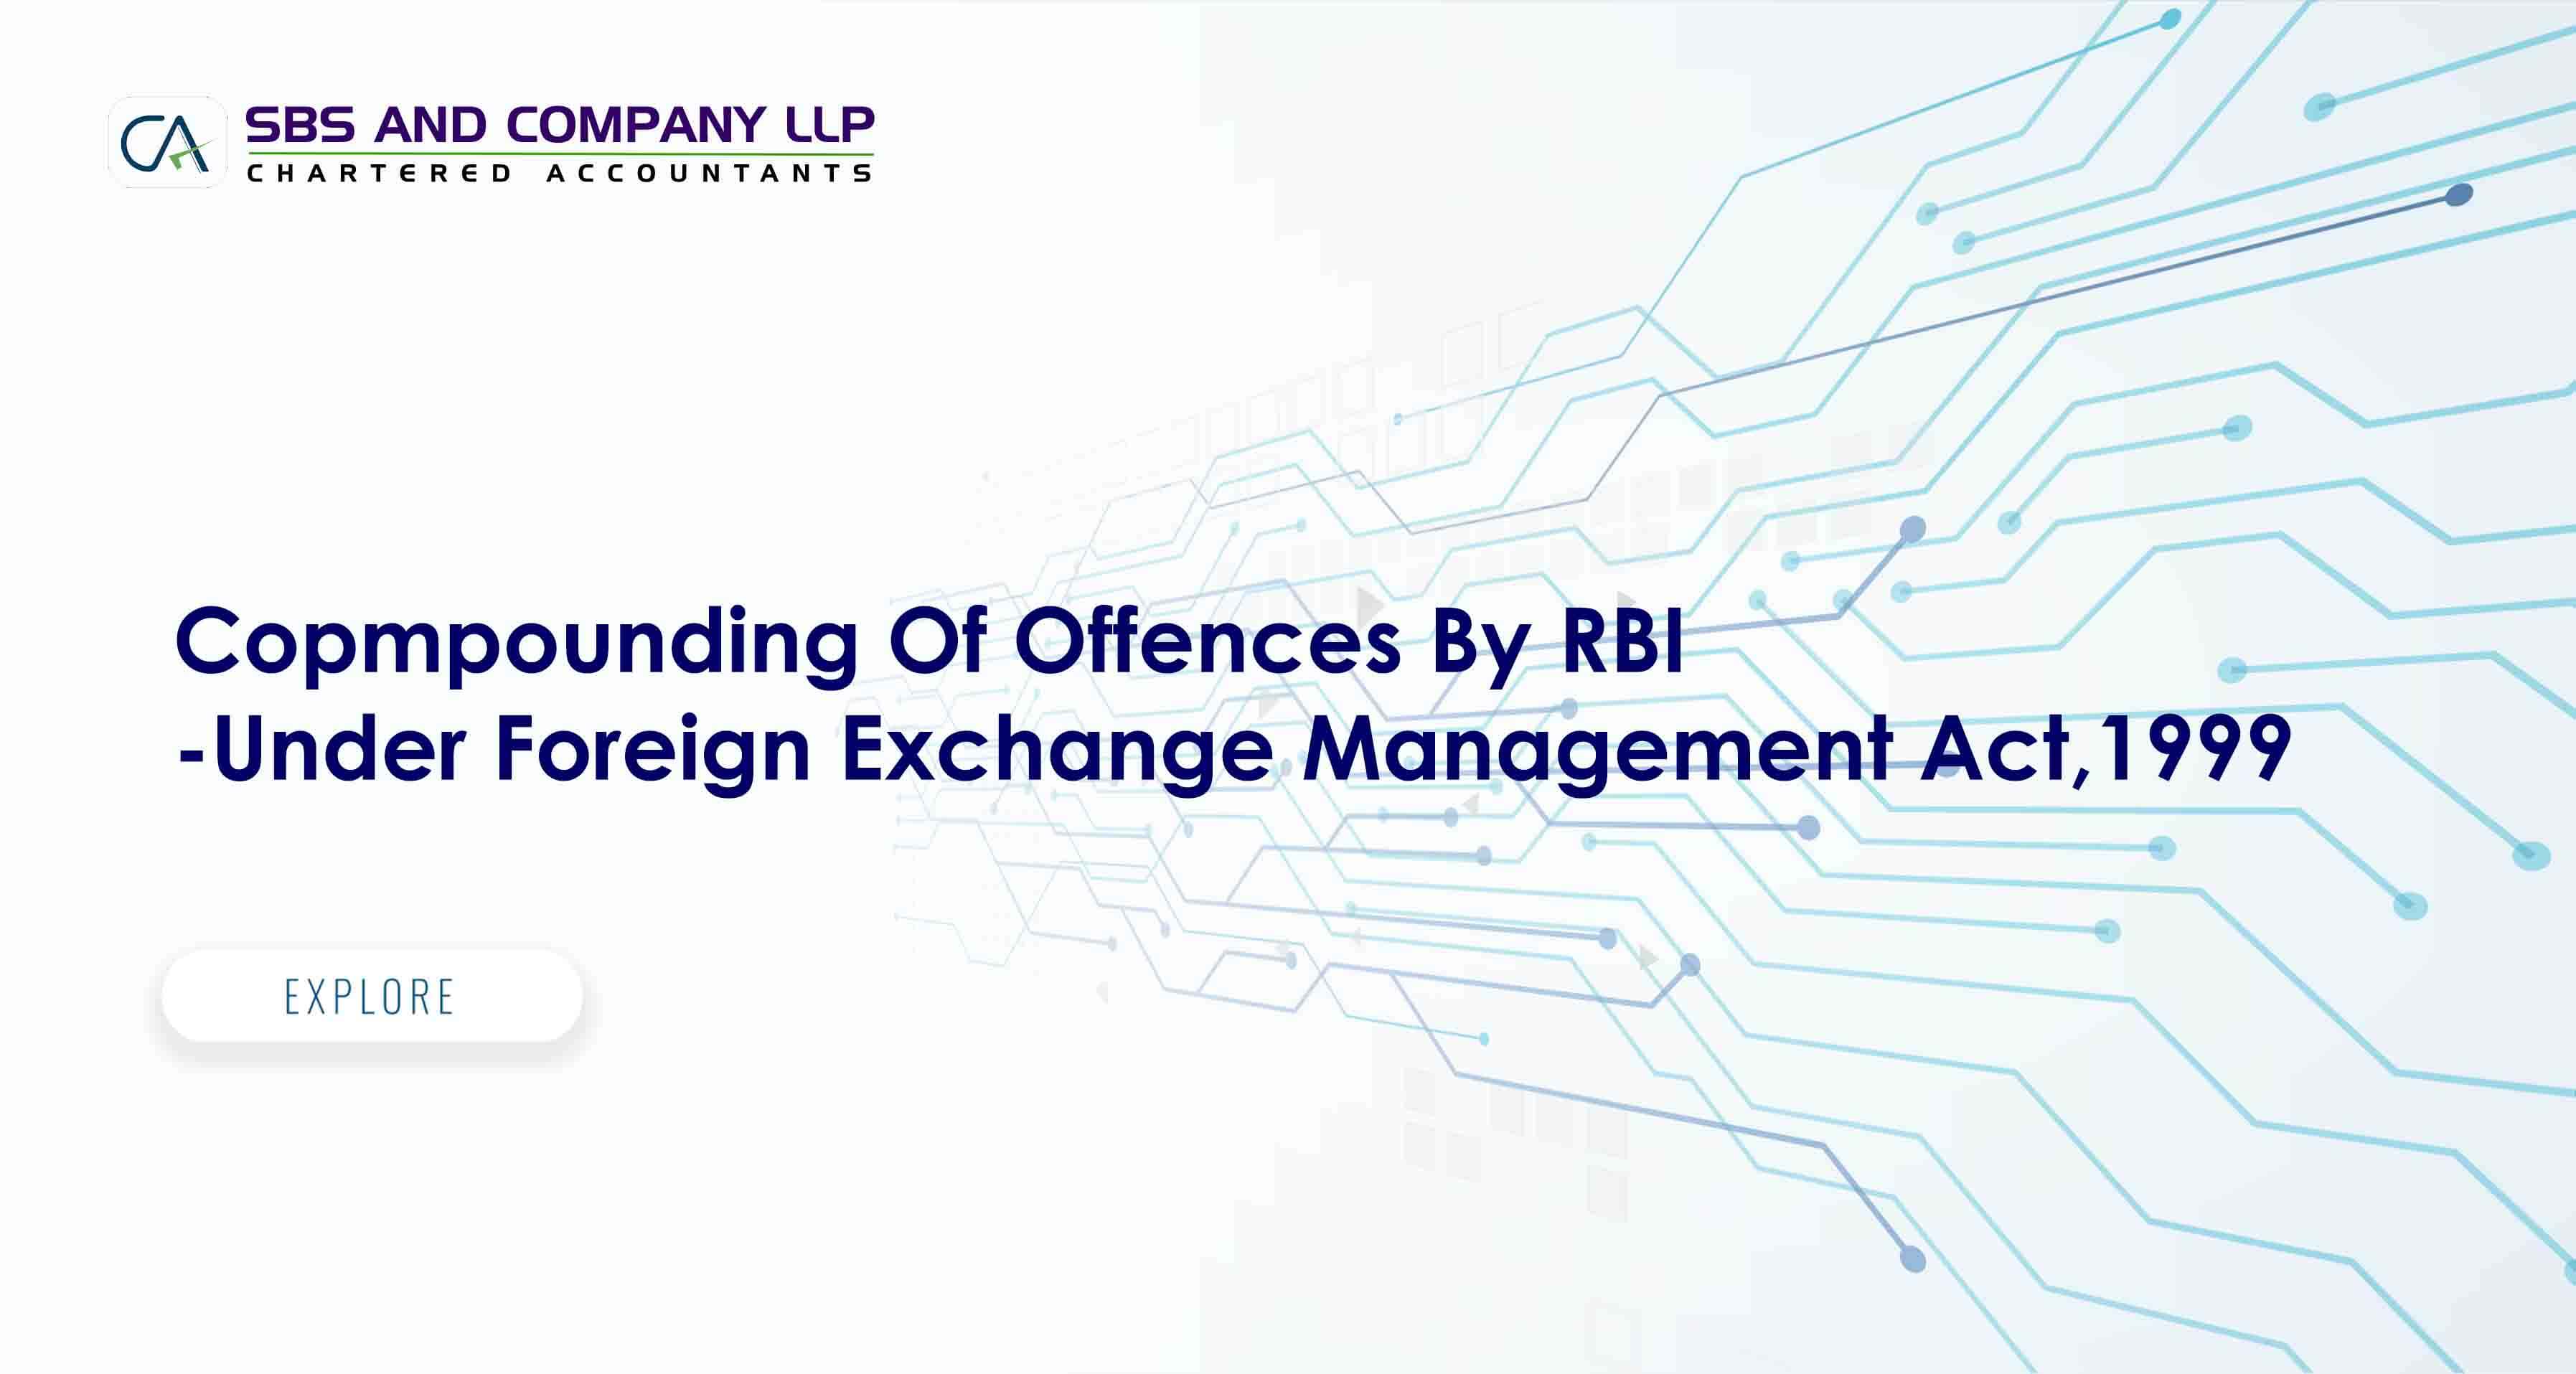 Copmpounding Of Offences By RBI-Under Foreign Exchange Management Act,1999